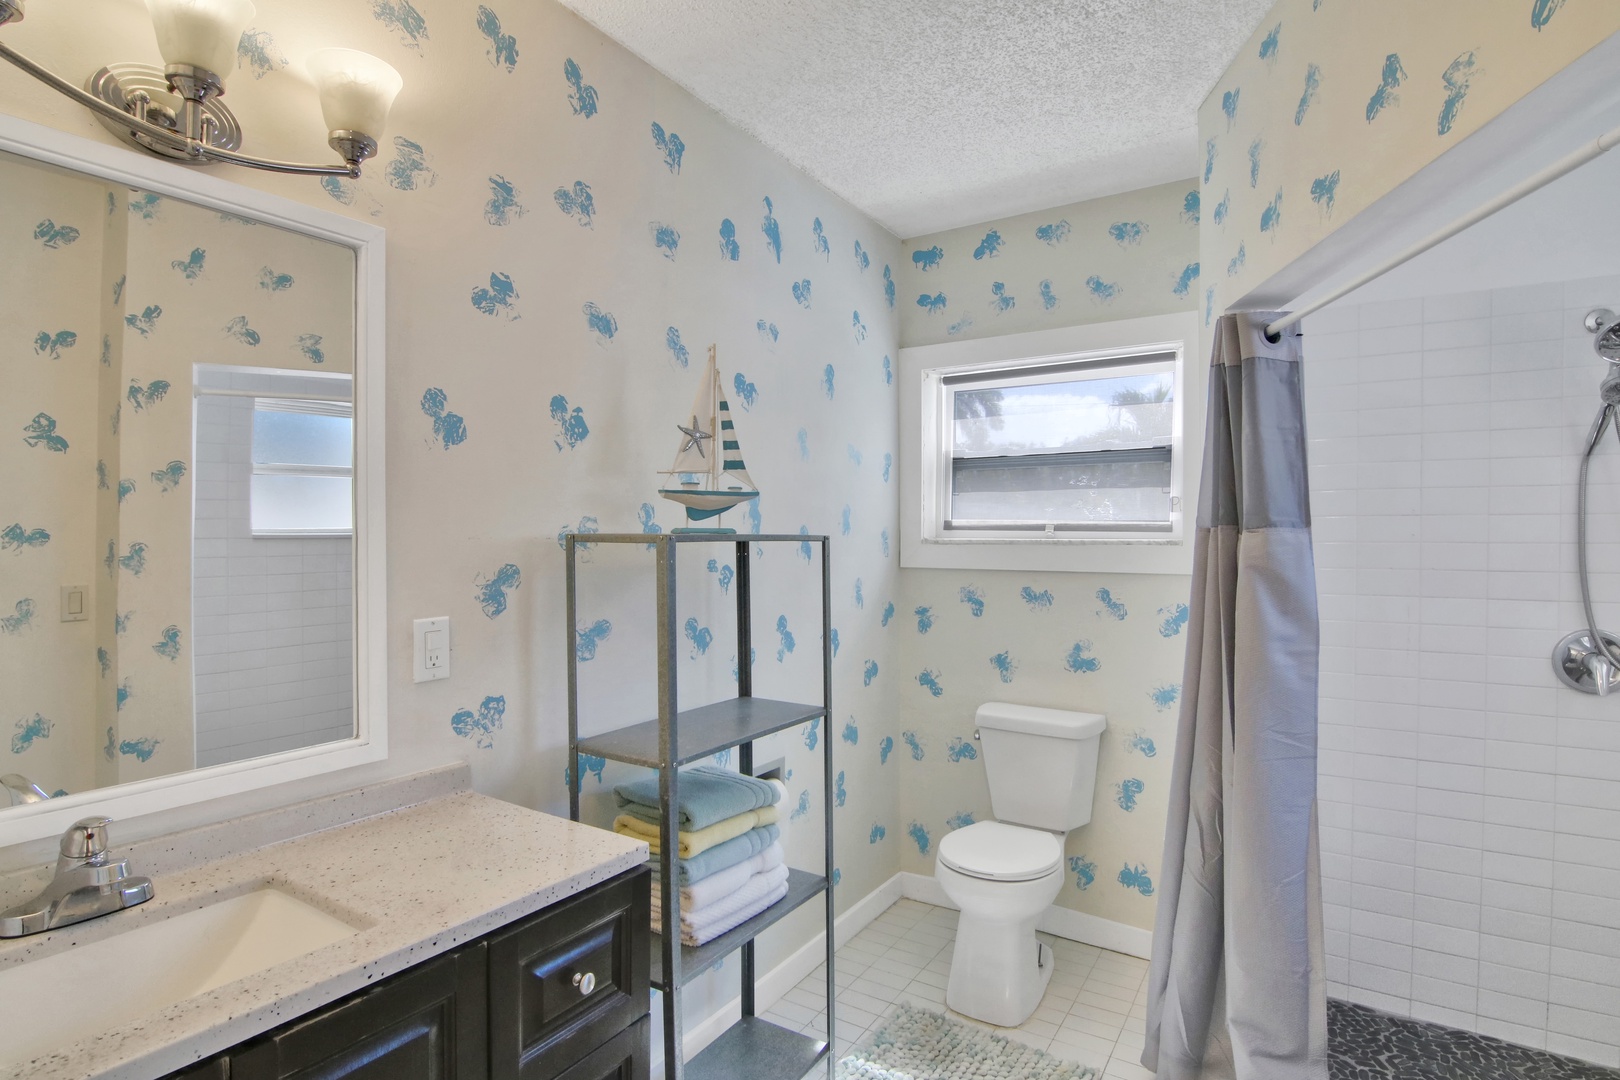 The final full bathroom offers a large vanity & walk-in shower